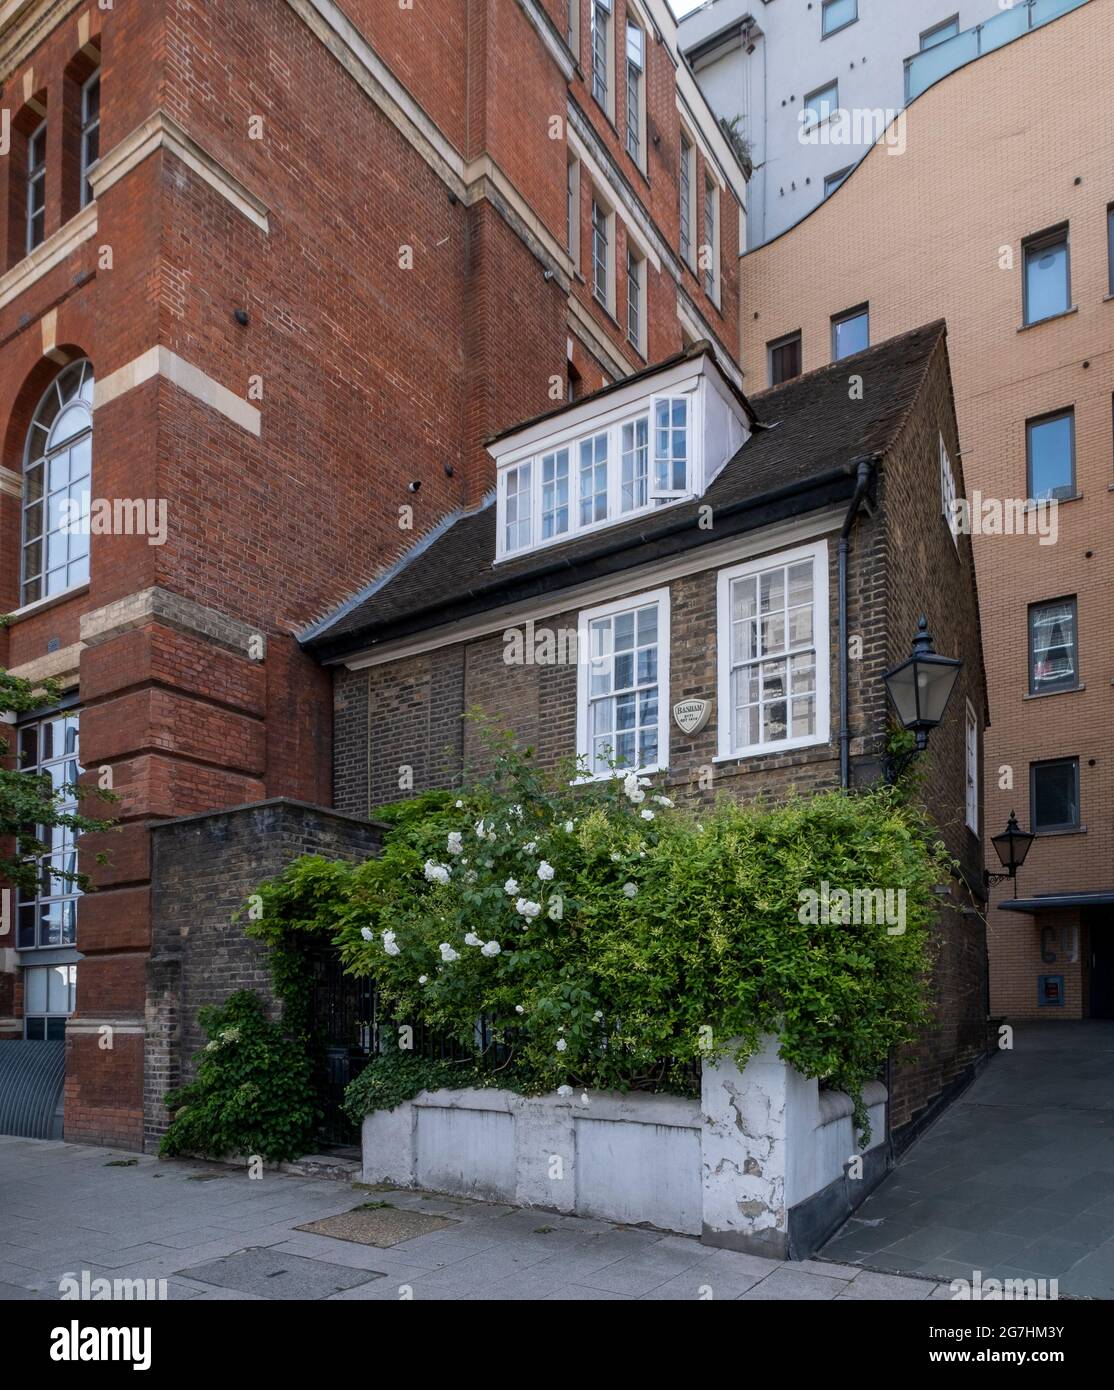 No 61 Hopton Street (1702) is the second oldest house in Bankside and has survived the redevelopment of the area, now Grade II listed. Stock Photo